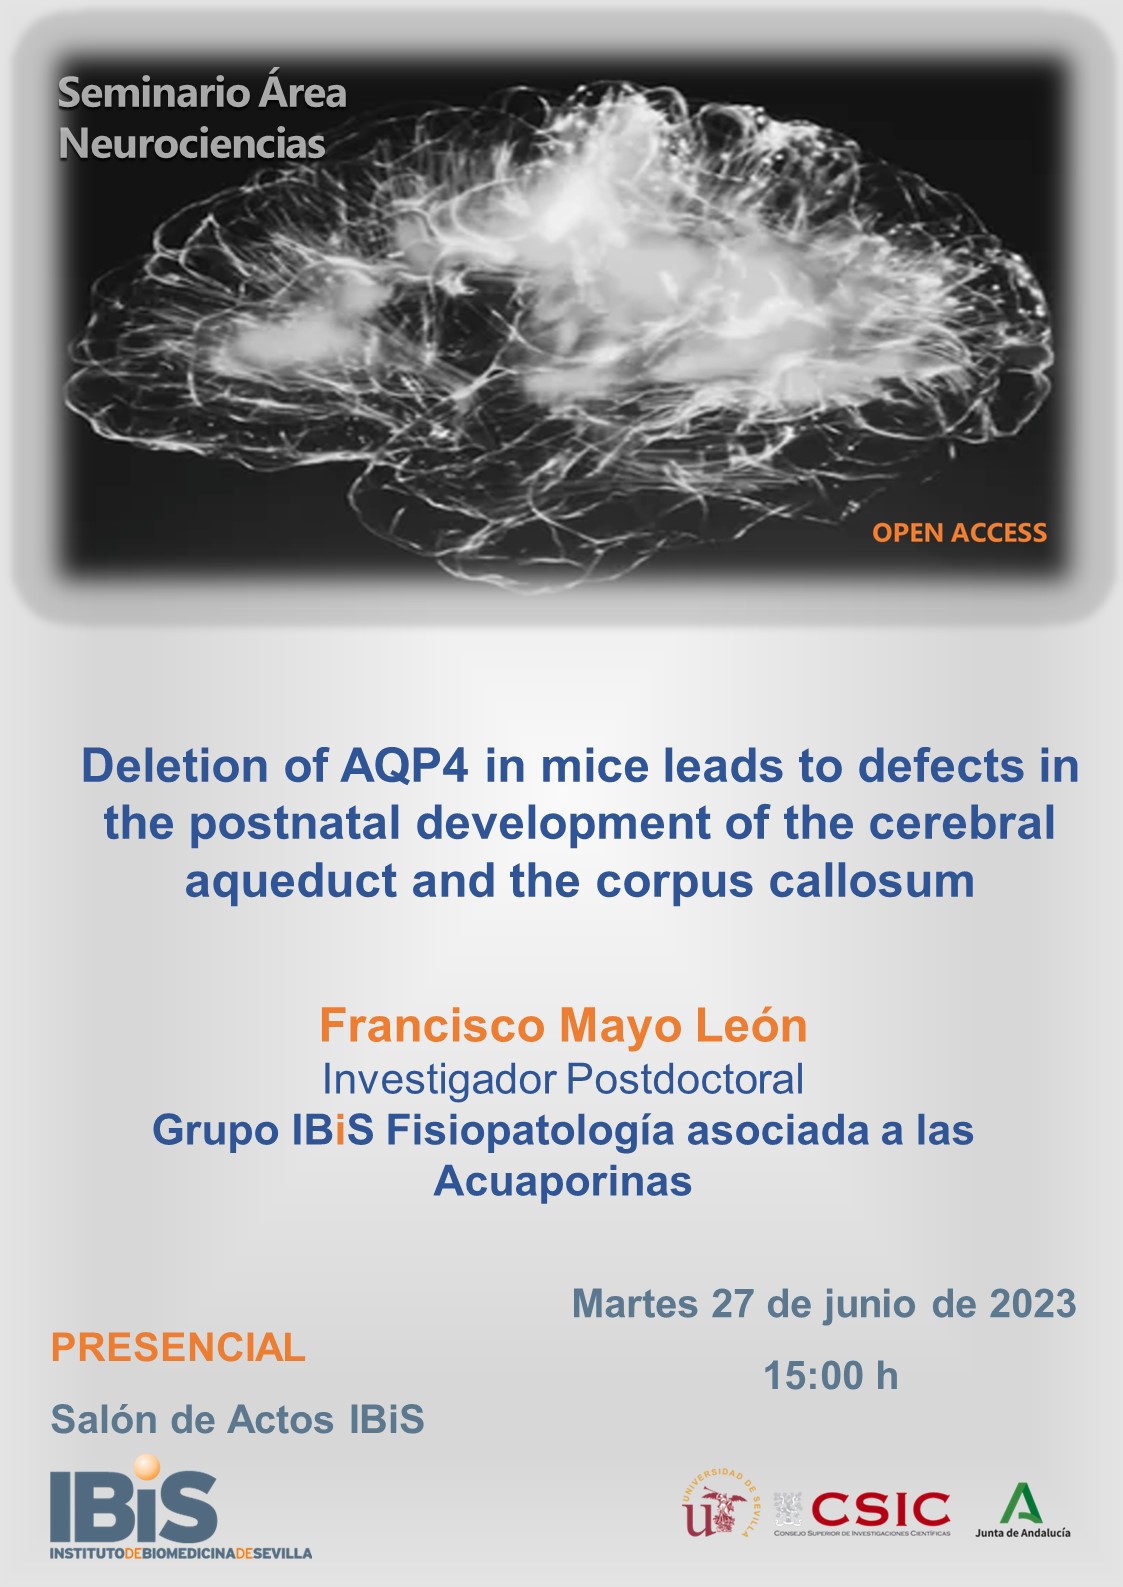 Poster: Deletion of AQP4 in mice leads to defects in the postnatal development of the cerebral aqueduct and the corpus callosum